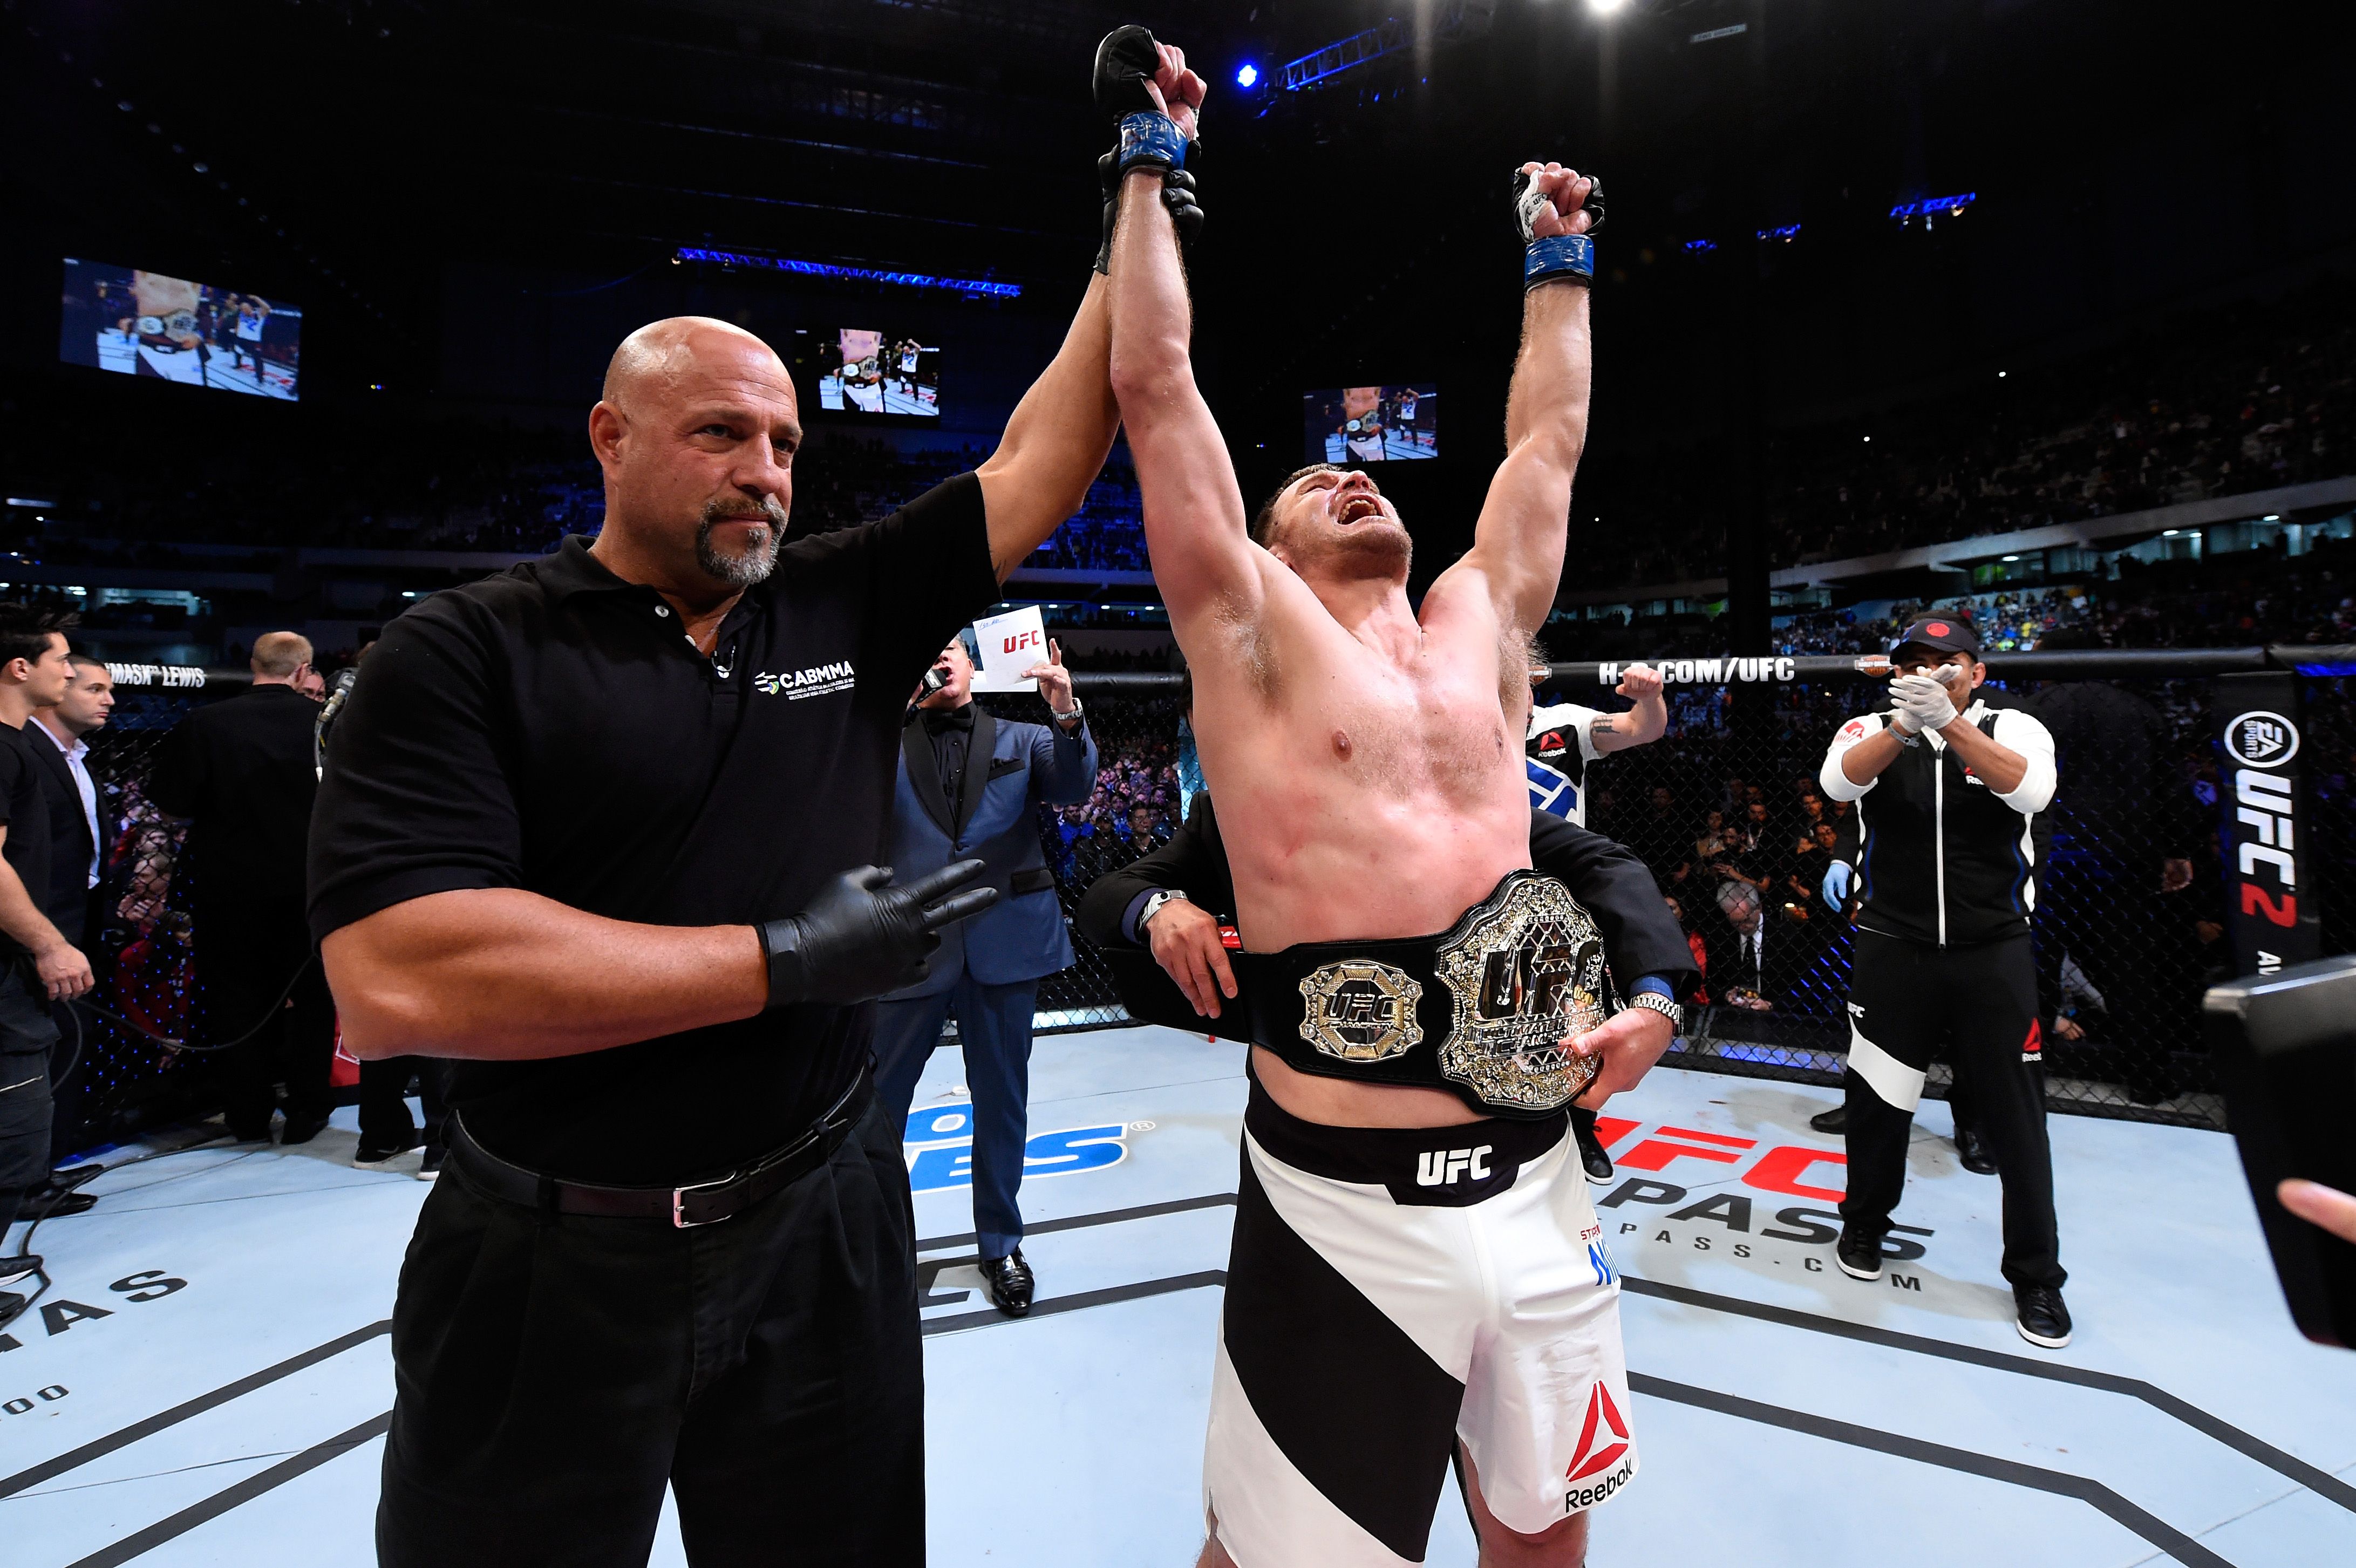 UFC fighter Stipe Miocic's hand is raised in victory.